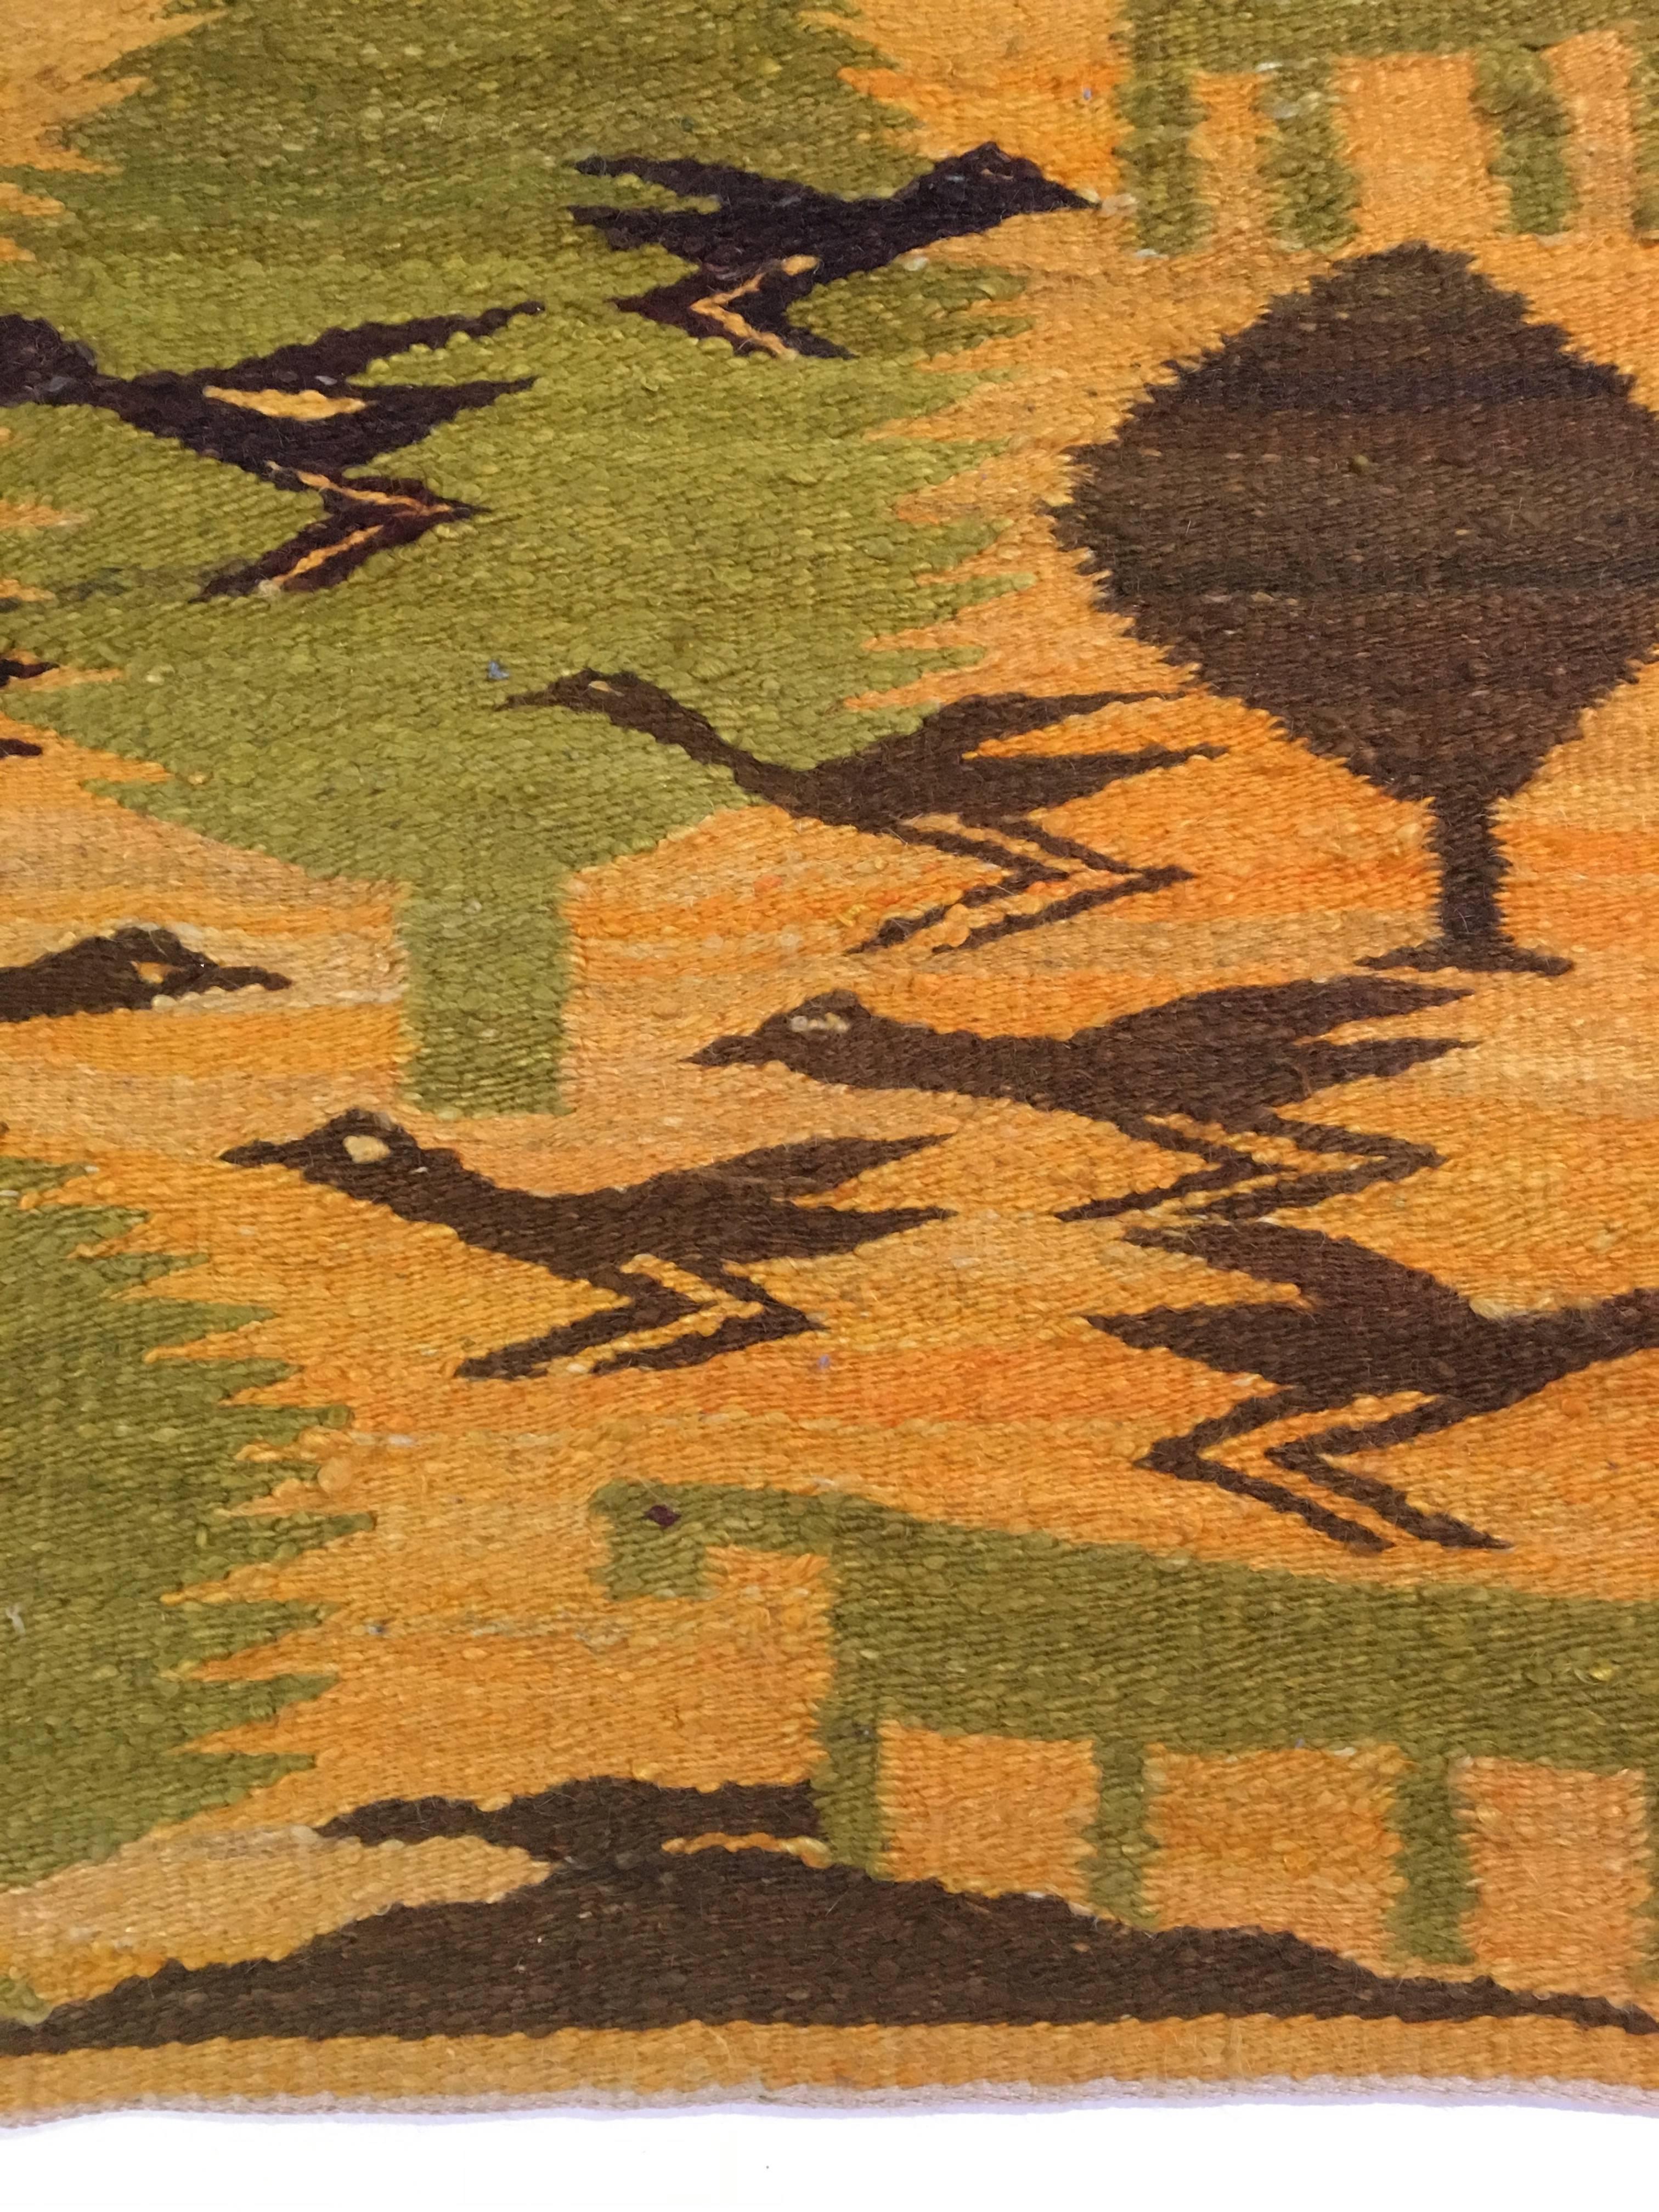 Beautiful handmade Scandinavian rug depicting people, animals and trees. Woven out of natural fibers in muted yellow, green, orange and brown hues. We can not find another example. Excellent vintage condition.